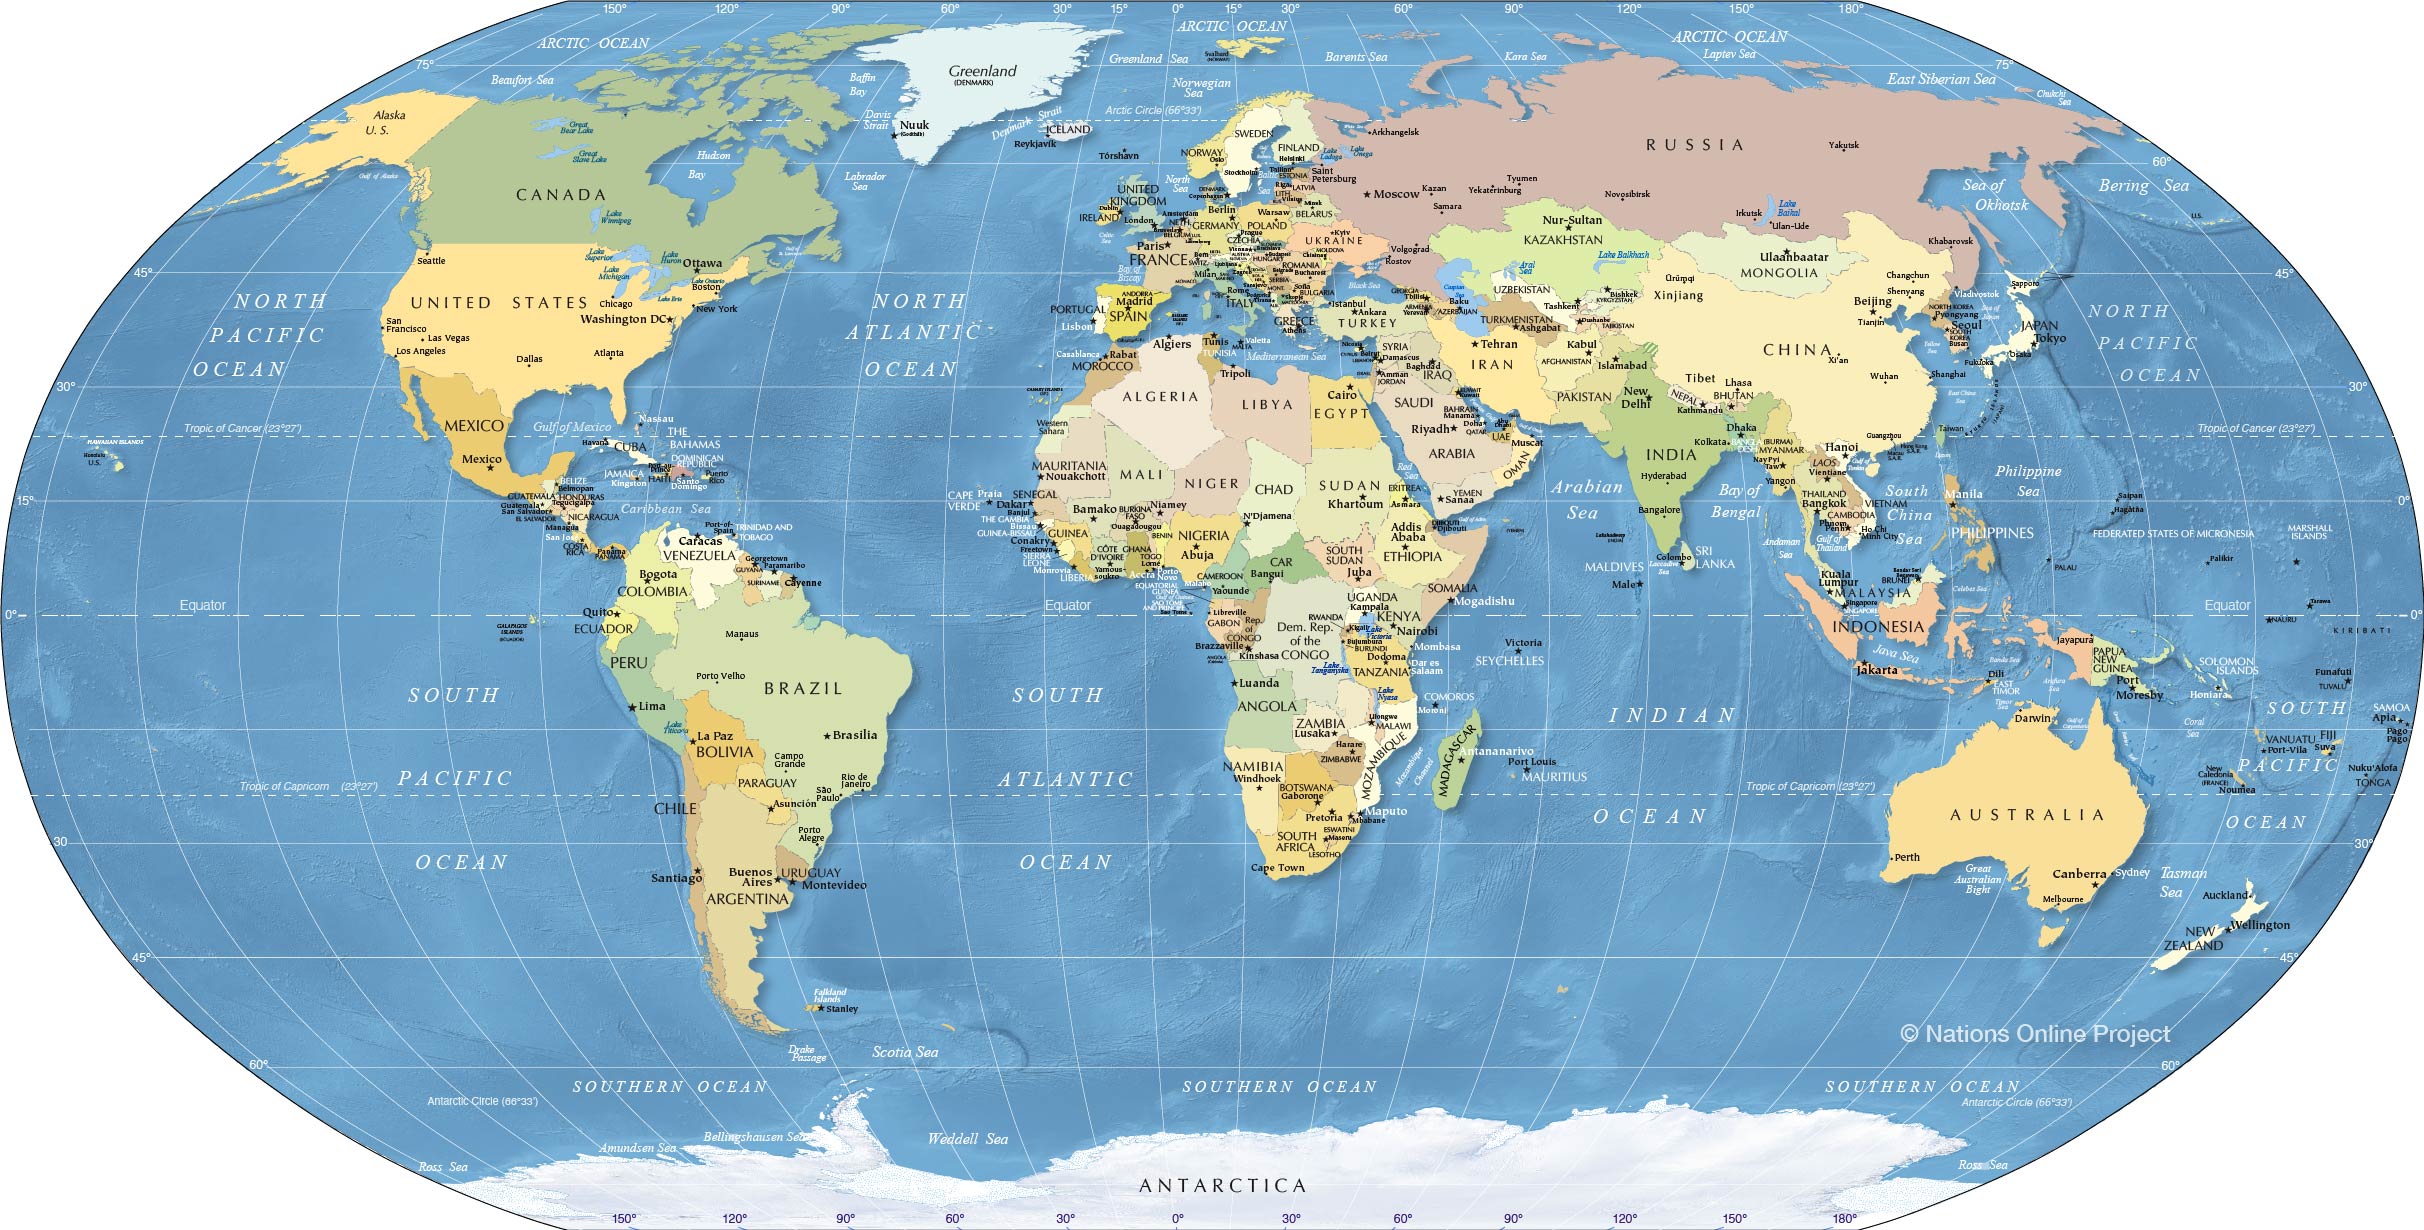 World Map - Political Map of the World - Nations Online ...
